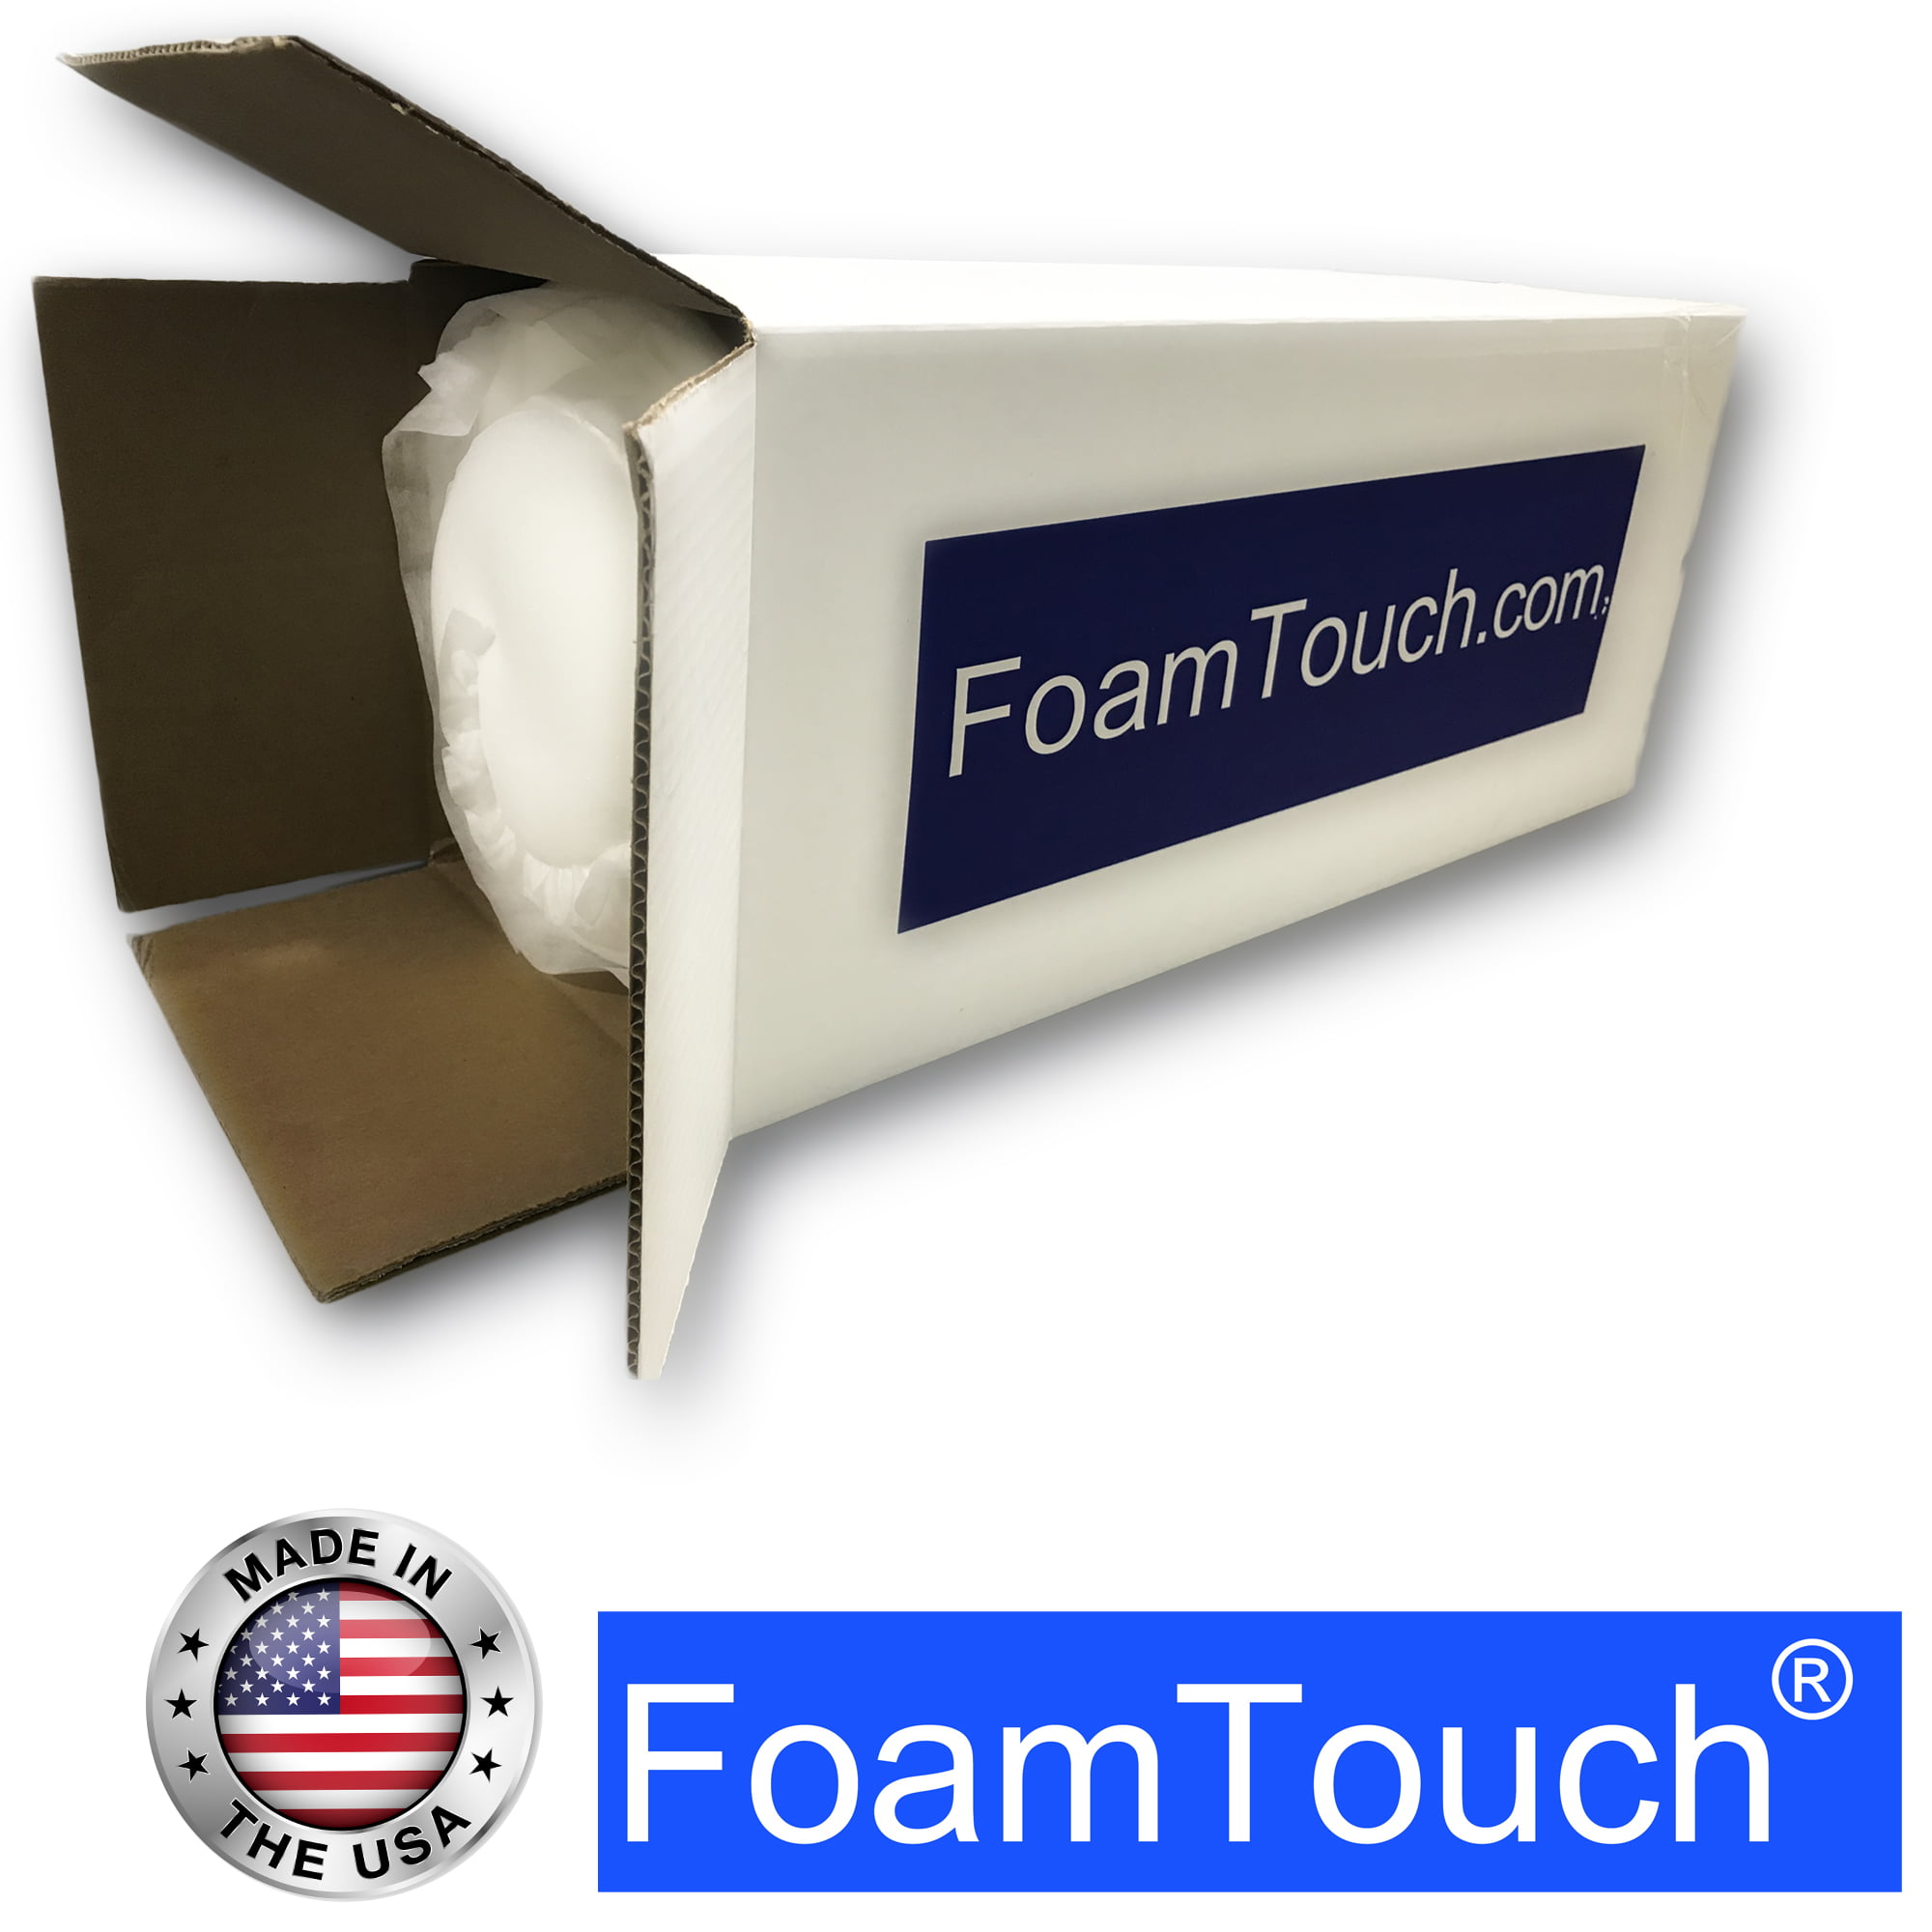 FoamTouch Upholstery Foam Cushion High Density 5 Height x 32 Width x 58 Length Made in USA 